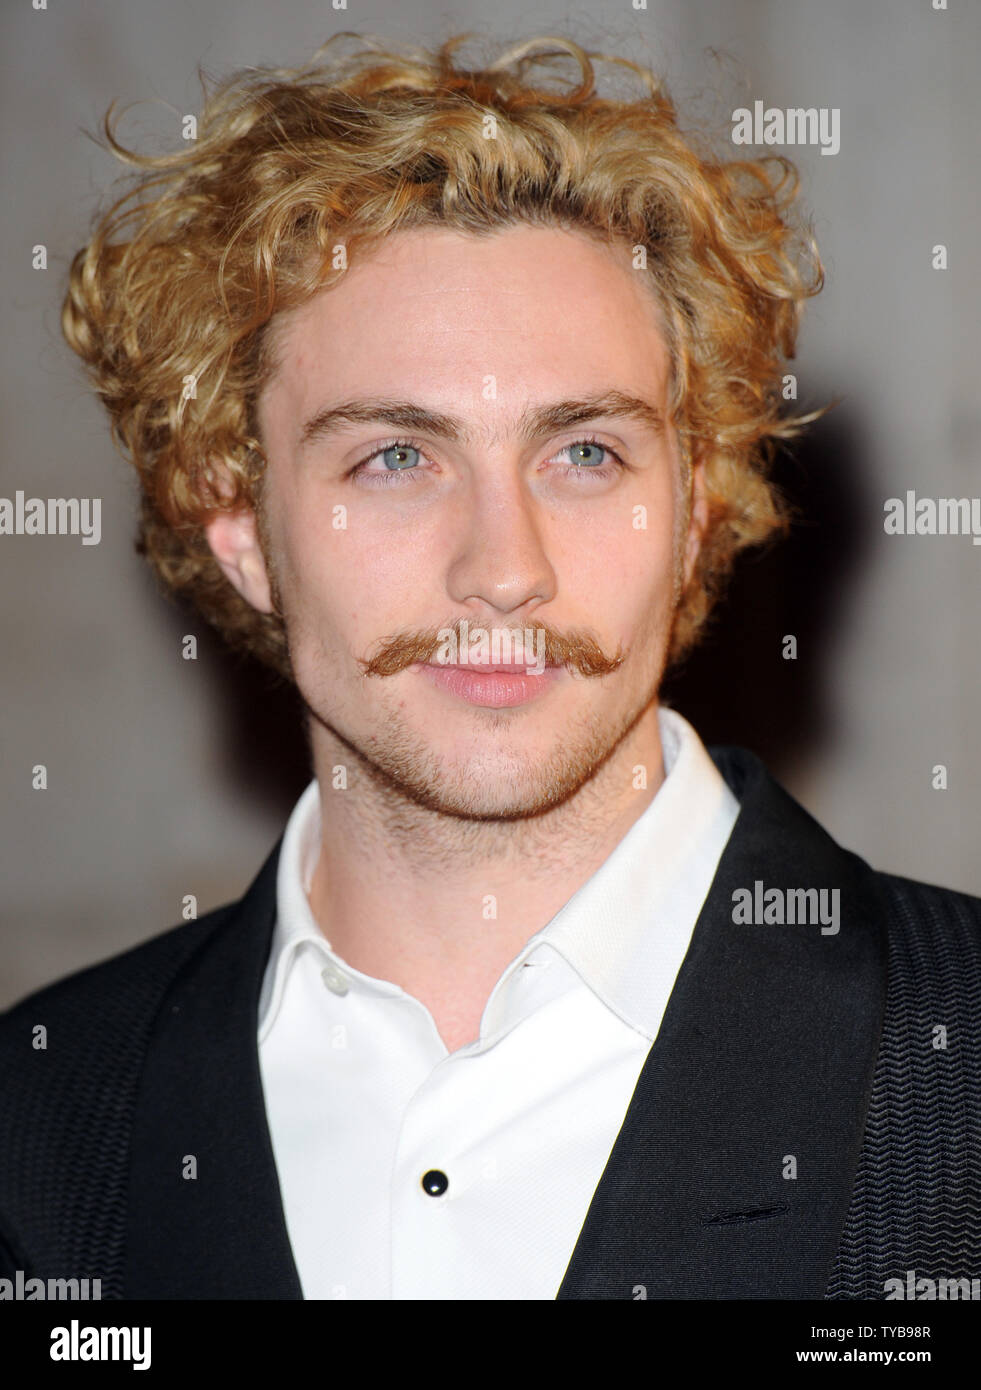 British artist/ director Sam Taylor Wood and actor Aaron Johnson attend the 'BFI London Film Festival Awards' at LSO St. Lukes in London on October 26, 2011.     UPI/Rune Hellestad Stock Photo